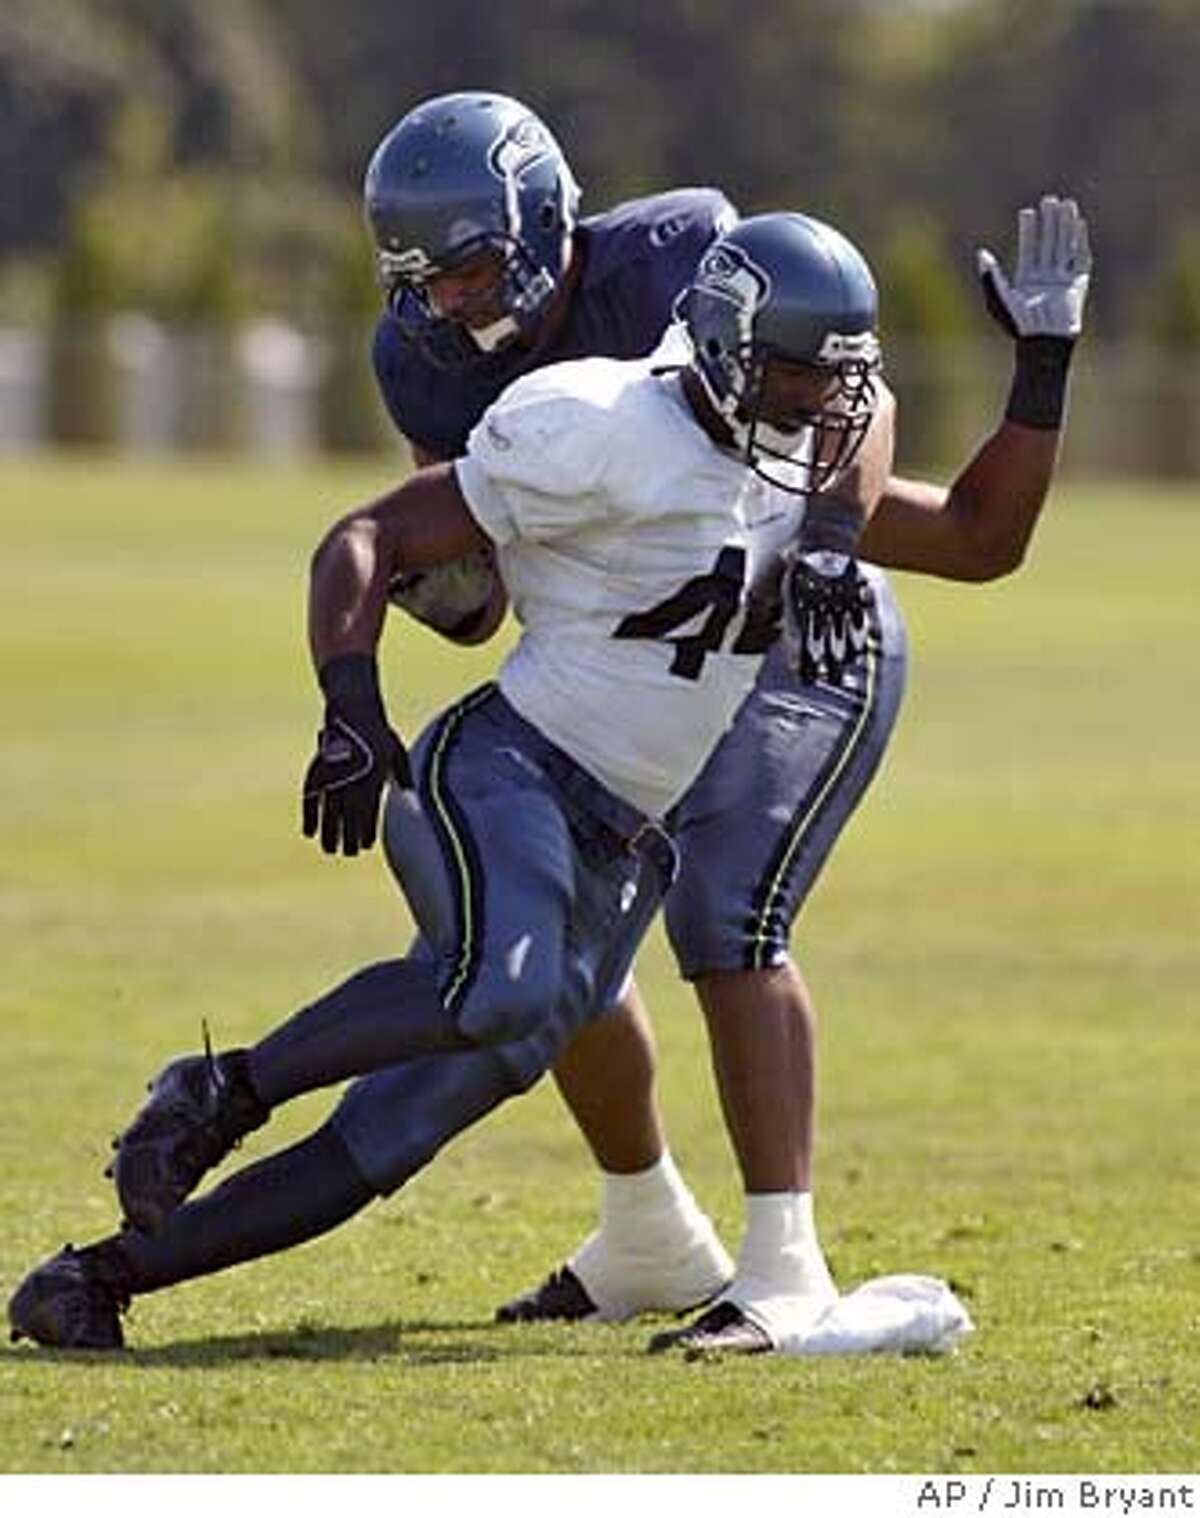 Seattle Seahawks linebacker Julian Peterson, front, gets by offensive tackle Sean Locklear in pass protection drills during football training camp Tuesday Aug. 1, 2006, at Eastern Washington University in Cheney, Wash. (AP Photo/Jim Bryant) EFE OUT